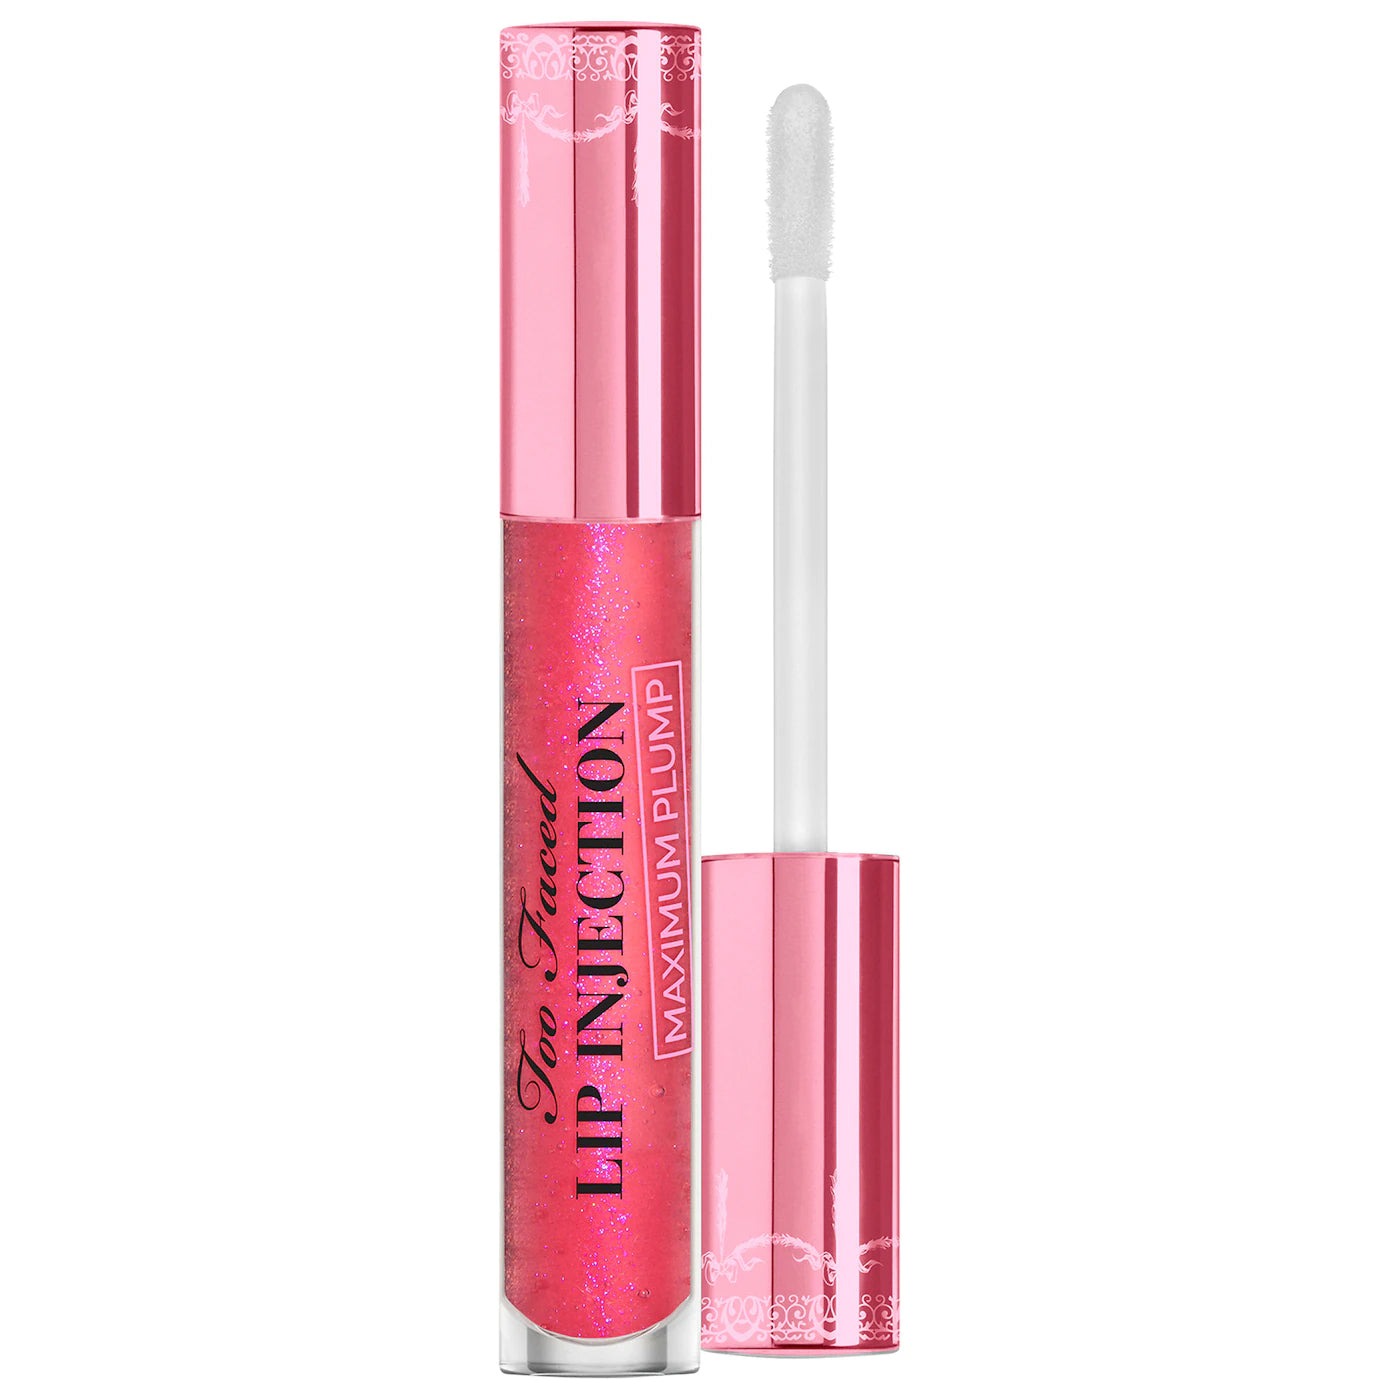 Too Faced - Lip Injection Maximum Plump Extra Strength Hydrating Lip Plumper